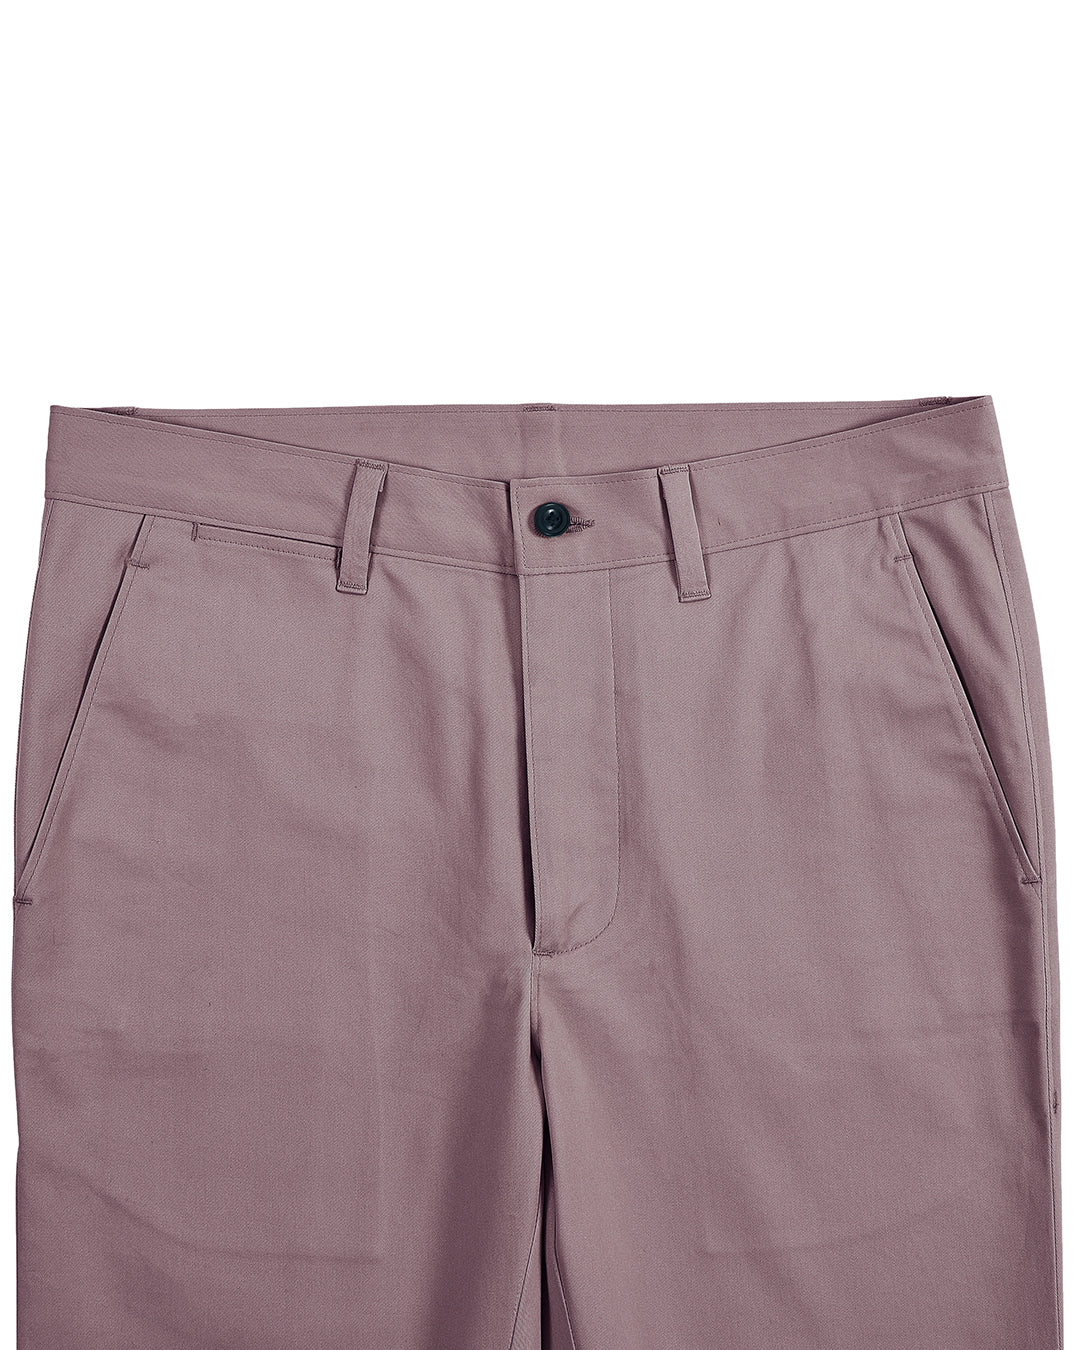 Front view of custom Genoa Chino pants for men by Luxire in purple fade